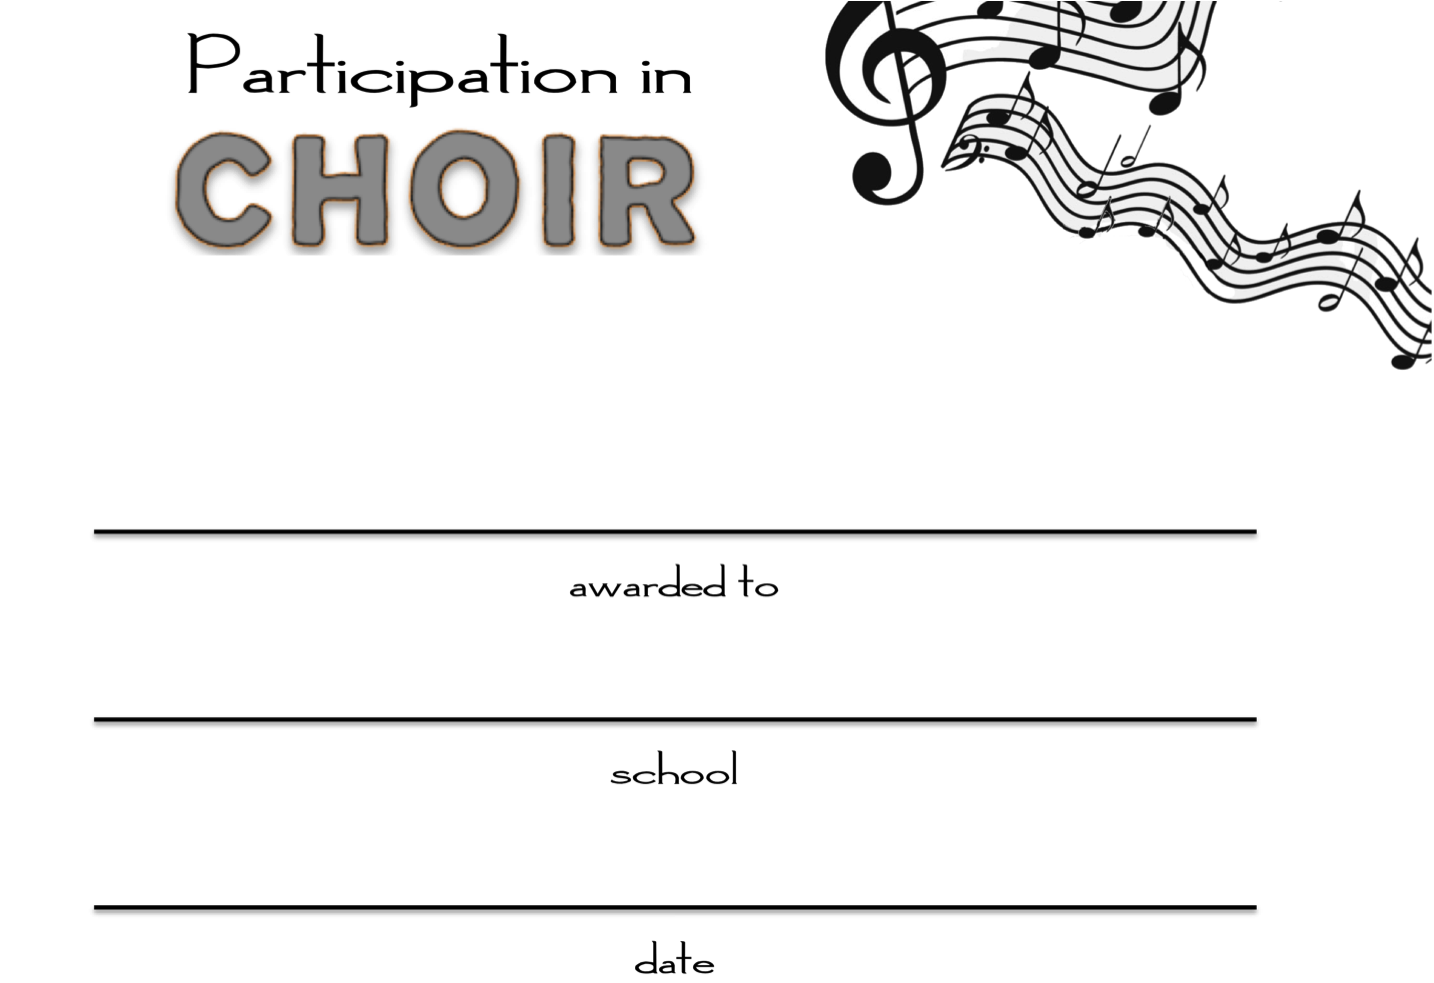 stock participation in choir certificate template